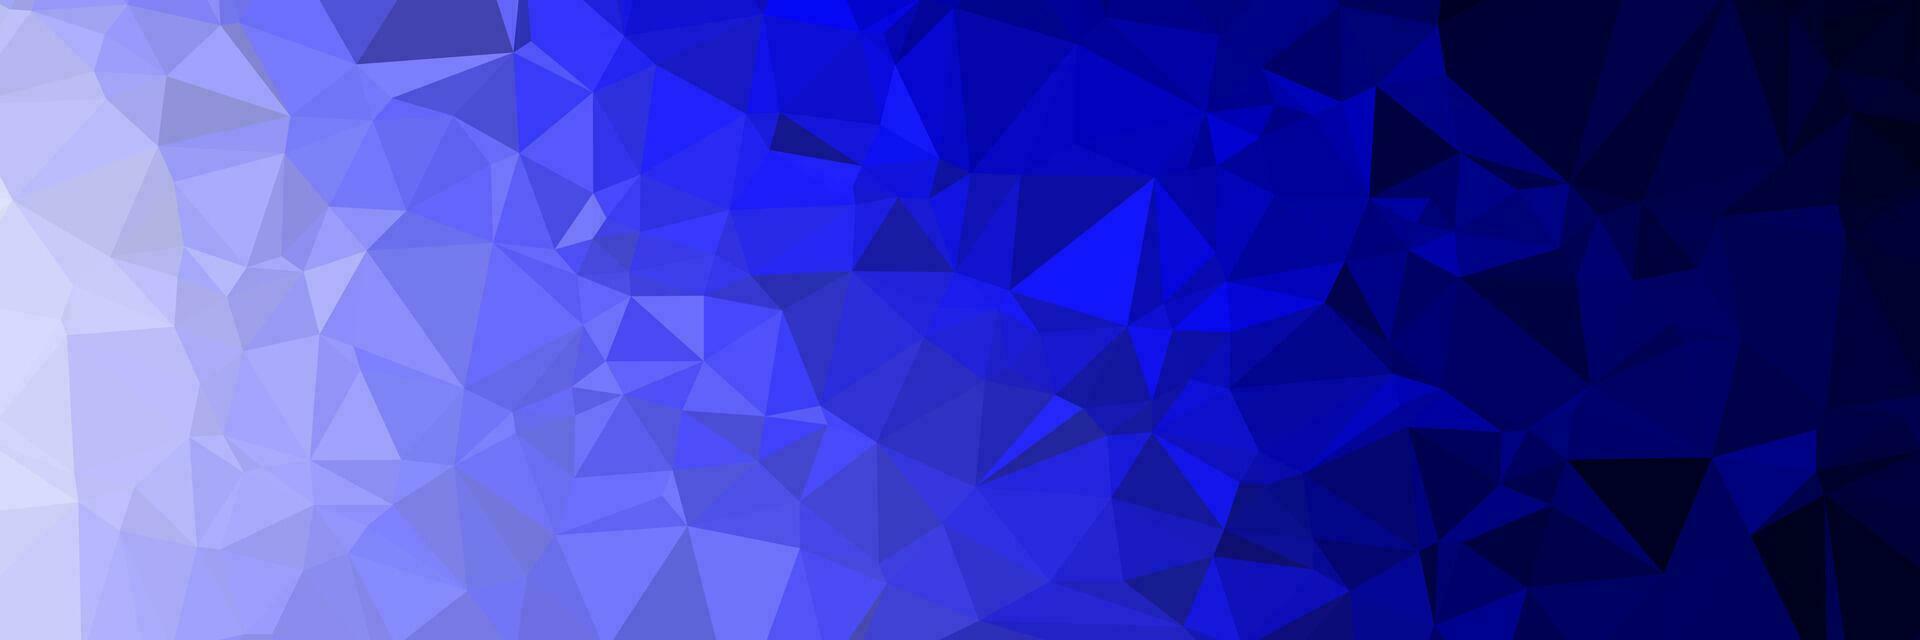 abstract blue background with triangles vector